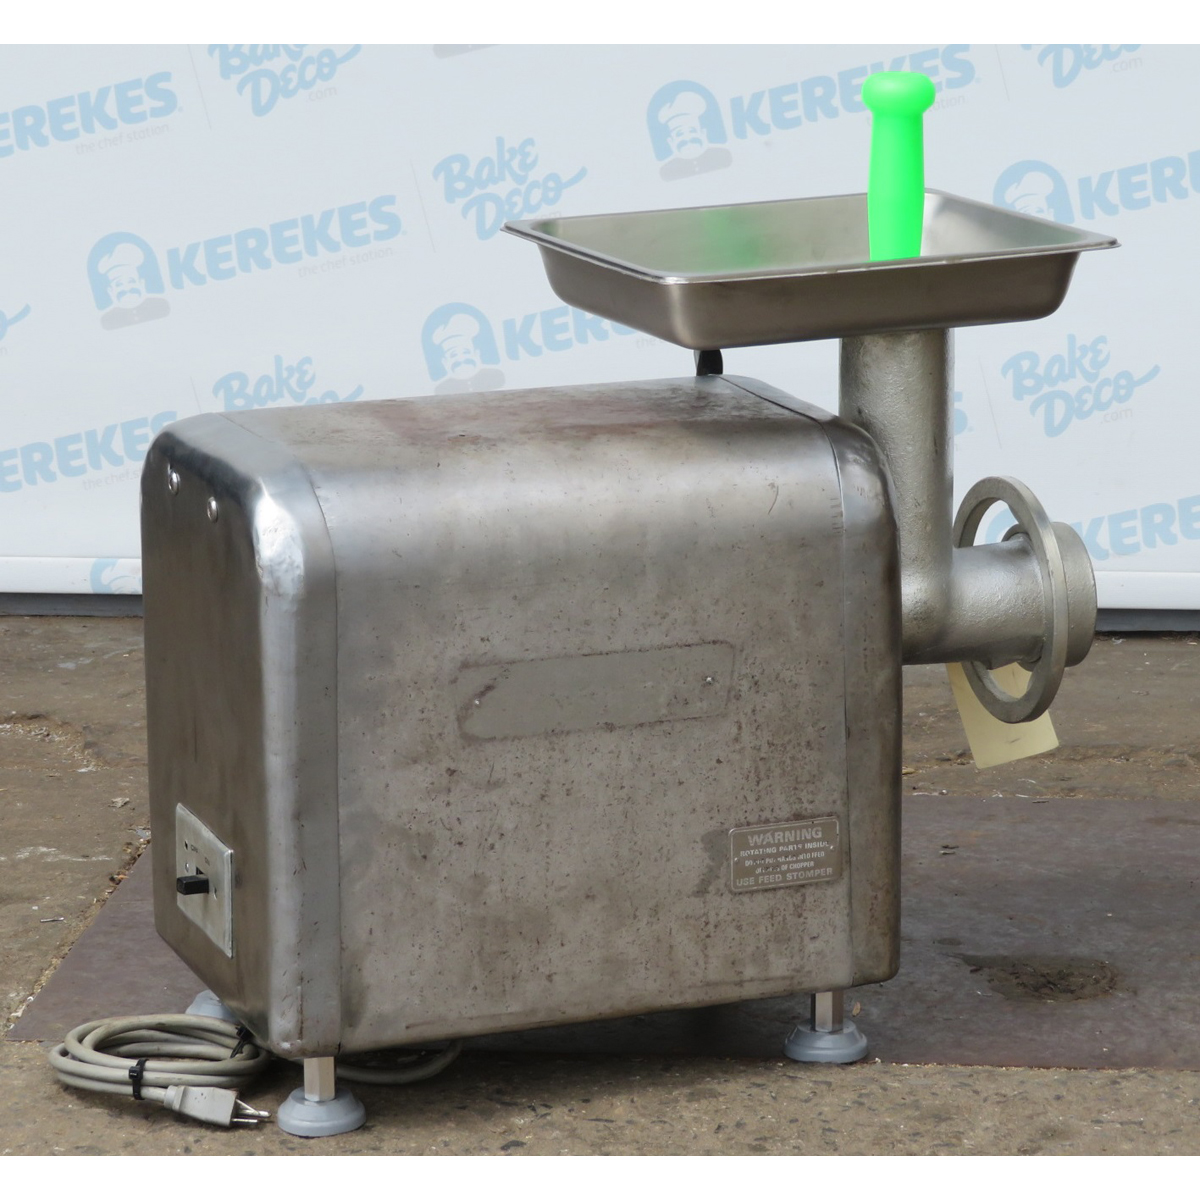 Hobart 4812 Meat Grinder, Used Good Condition image 1